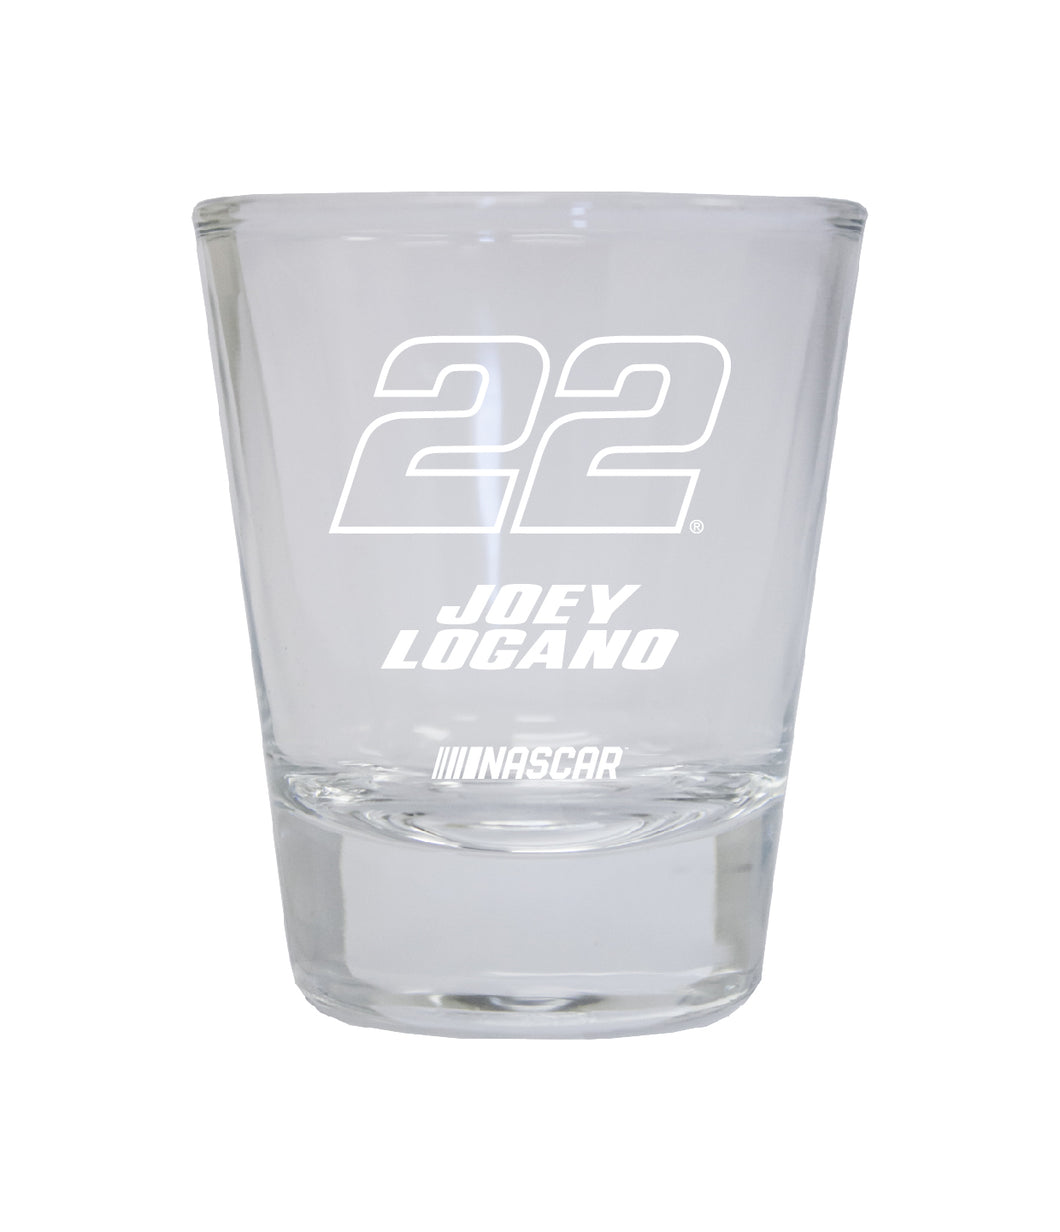 Joey Logano #22 Nascar Etched Round Shot Glass New for 2022